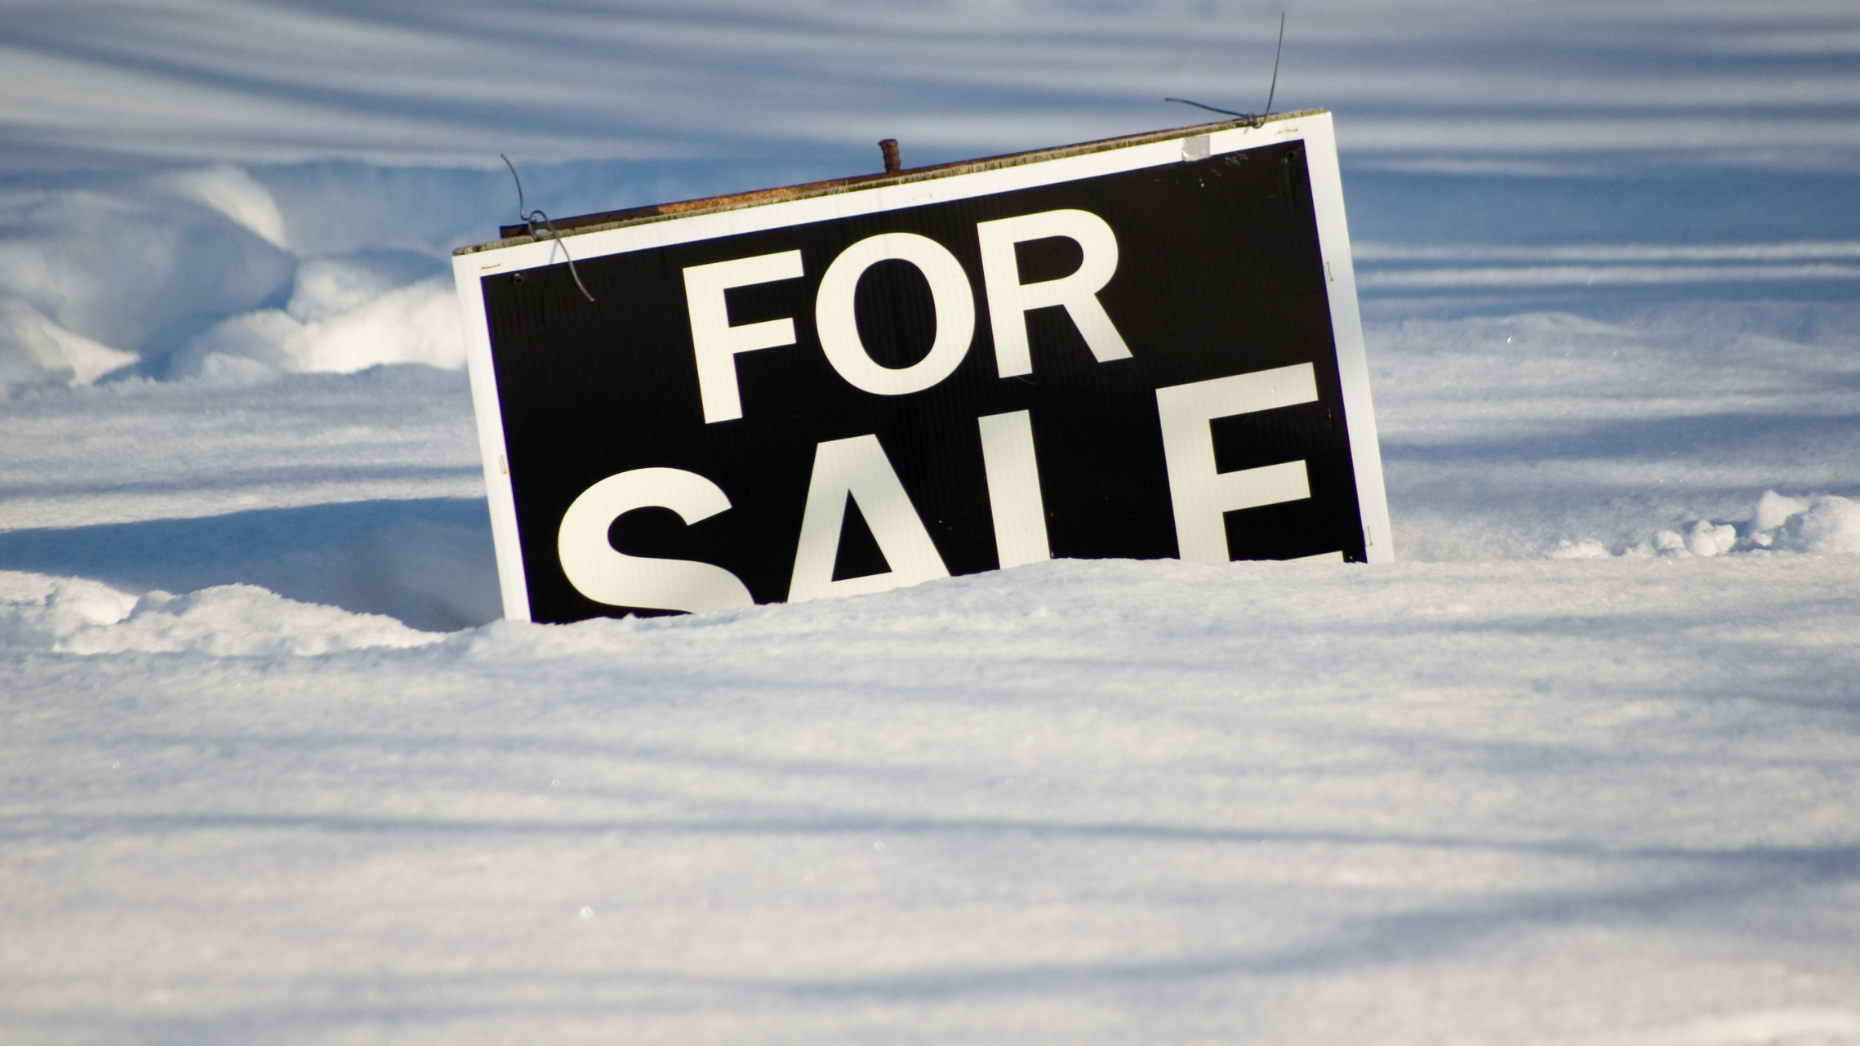 for-sale-winter